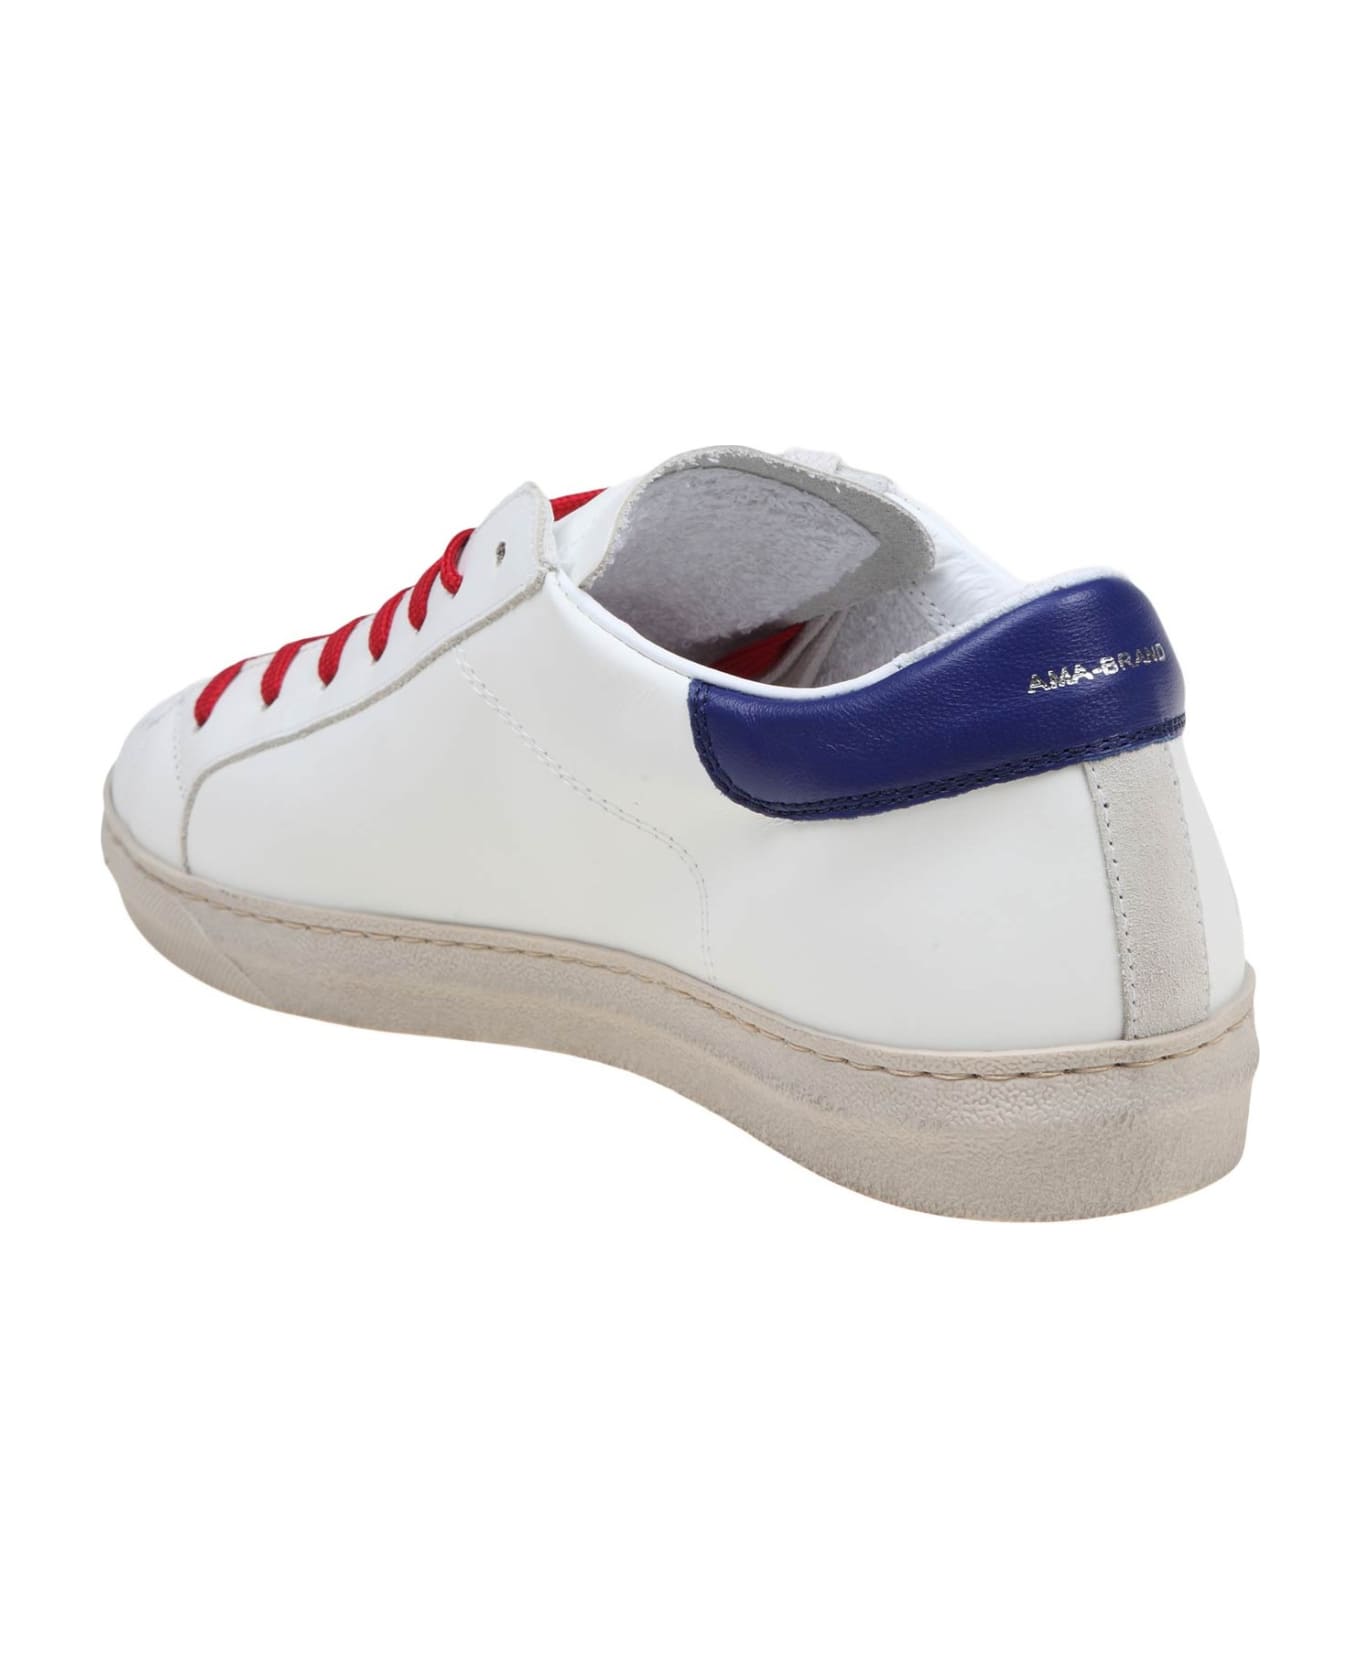 AMA-BRAND White And Blue Leather Sneakers - WHITE/BLU